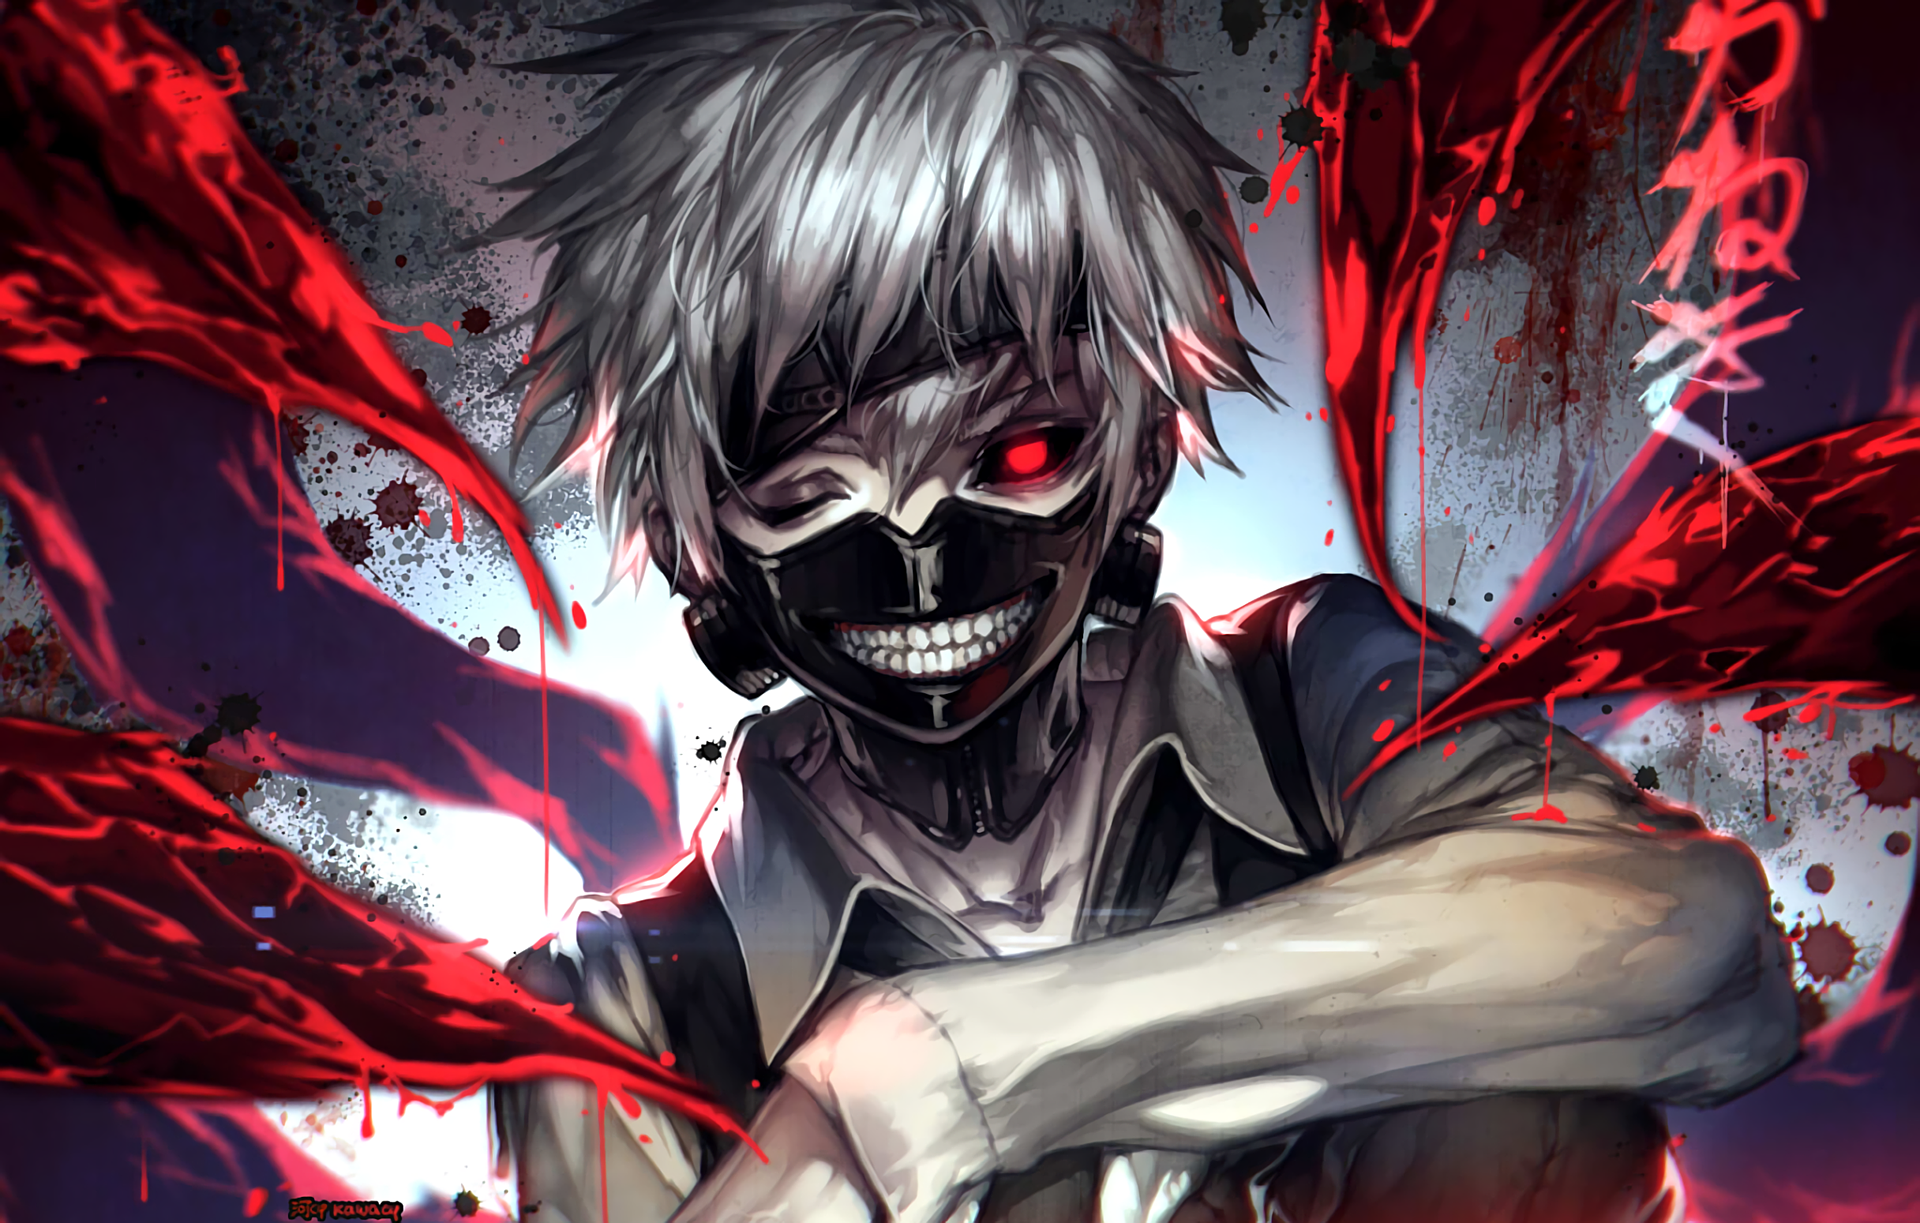 Hiya! I'm new to this App and I love Tokyo Ghoul! Here's a pic